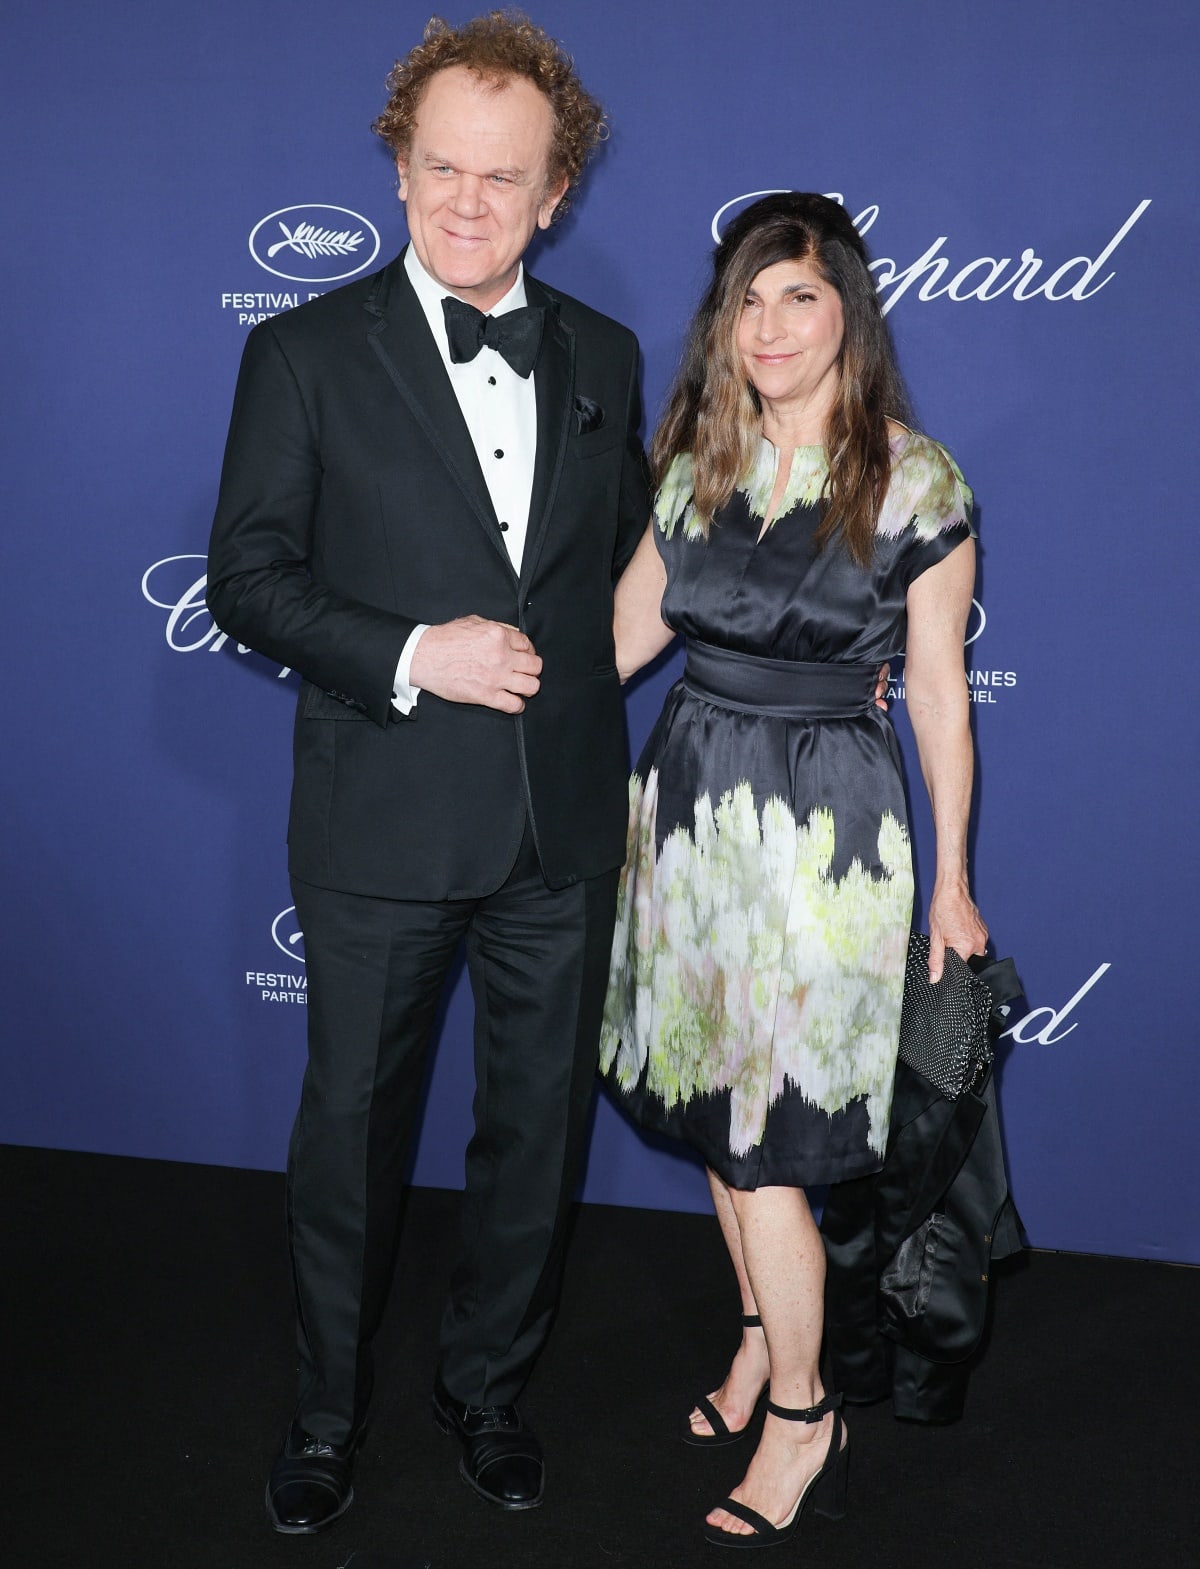 John C. Reilly and Alison Dickey attending the Chopard Trophy during the 76th Cannes Film Festival